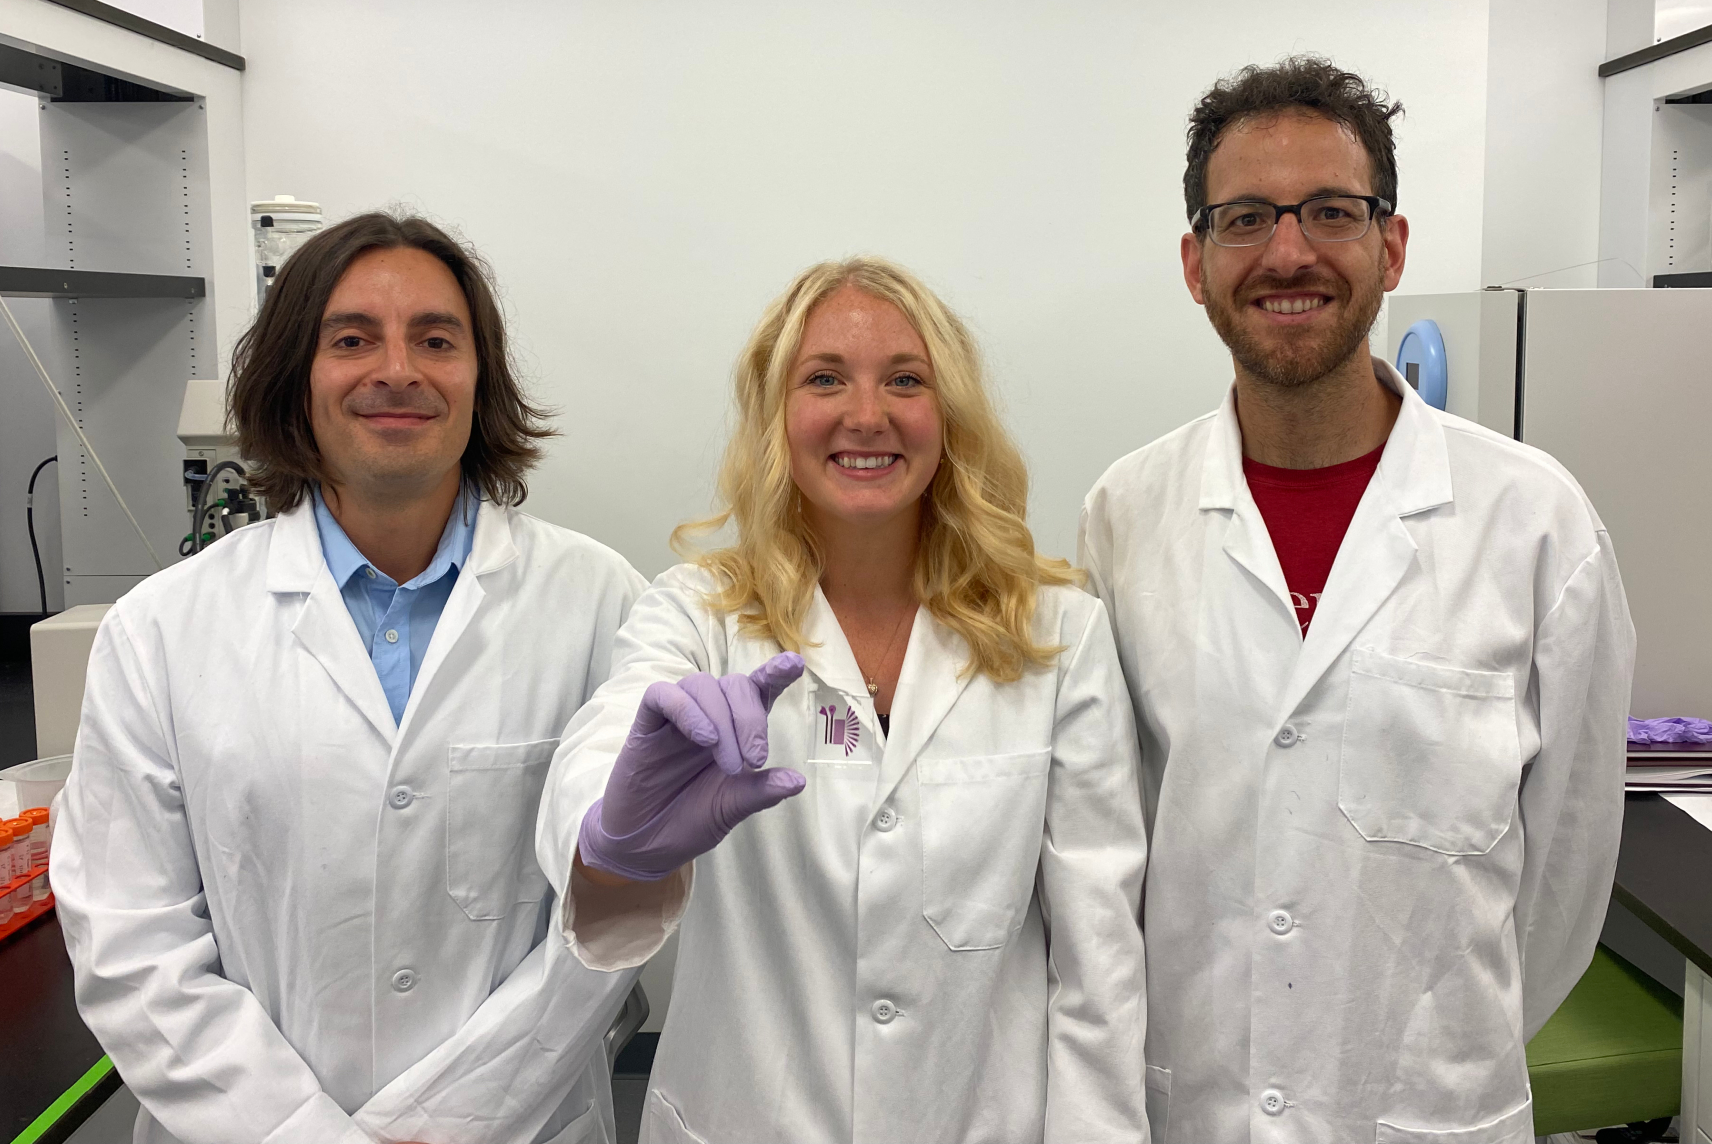 Wearing lab coats, Michael Mitchell, Sarah Shepherd and David Issadore pose with their new device.